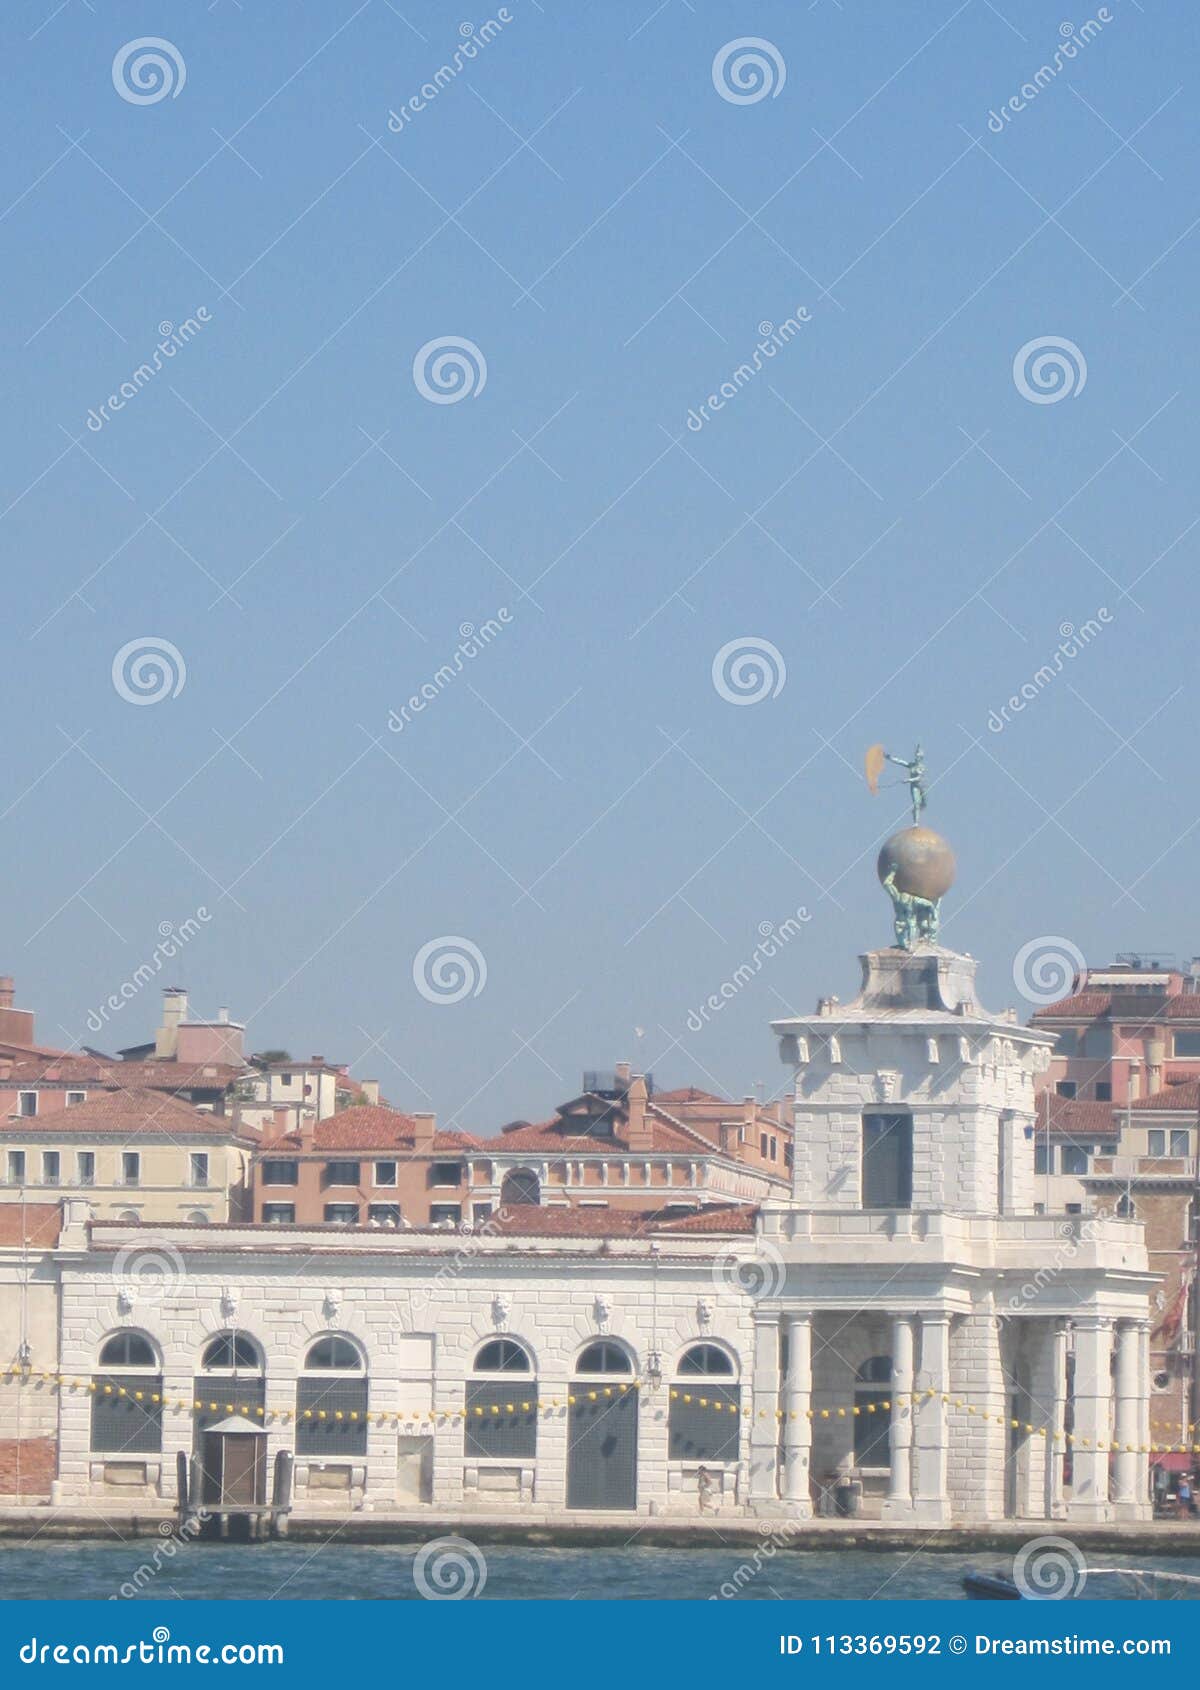 beautiful churches of venice in summer